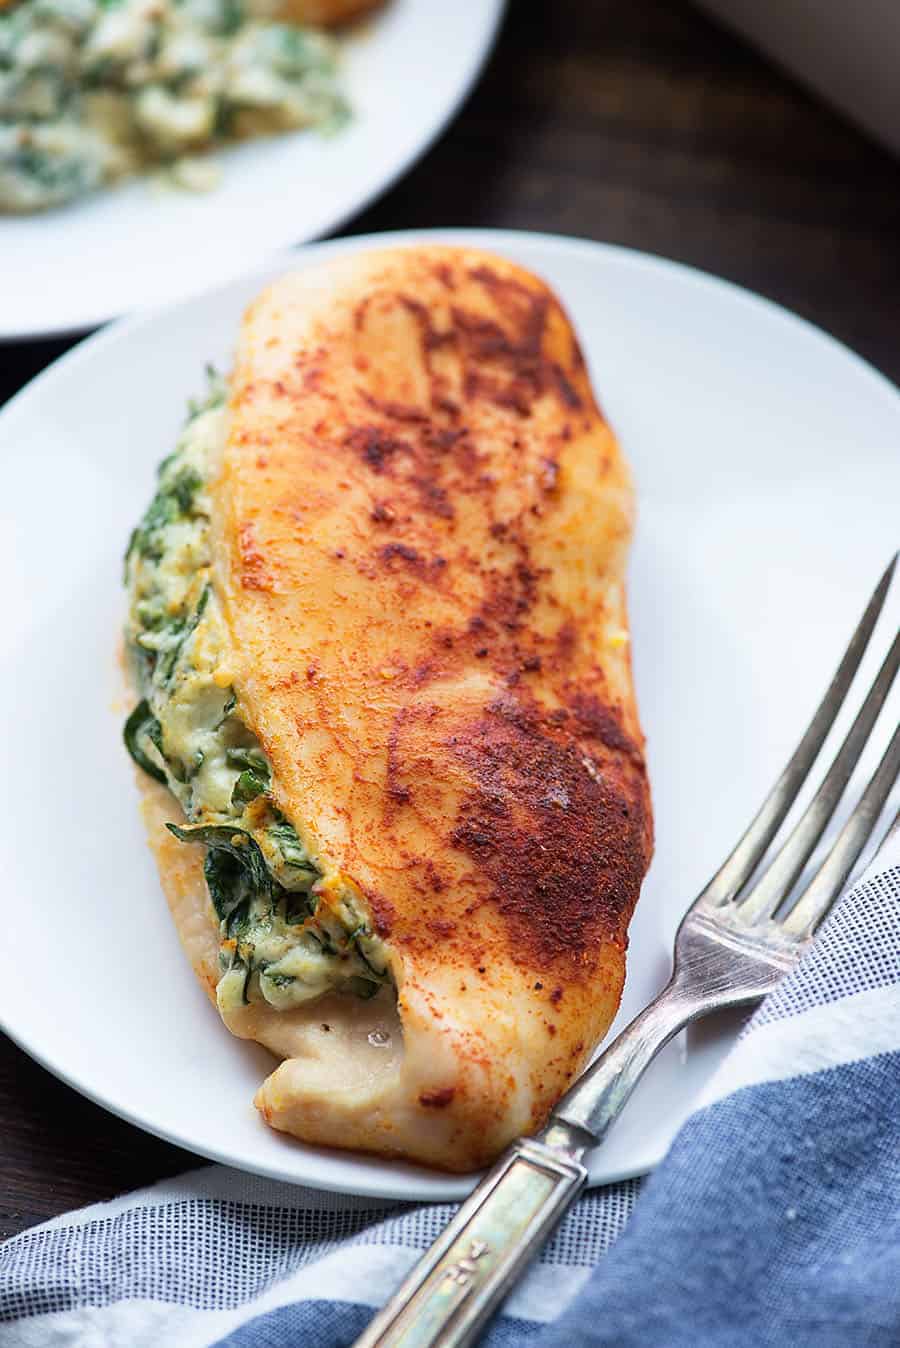 Stoffed Chiken : Easy Stuffed Rolled Chicken Recipe - Relish / Featured in 6 easy weeknight dinners.